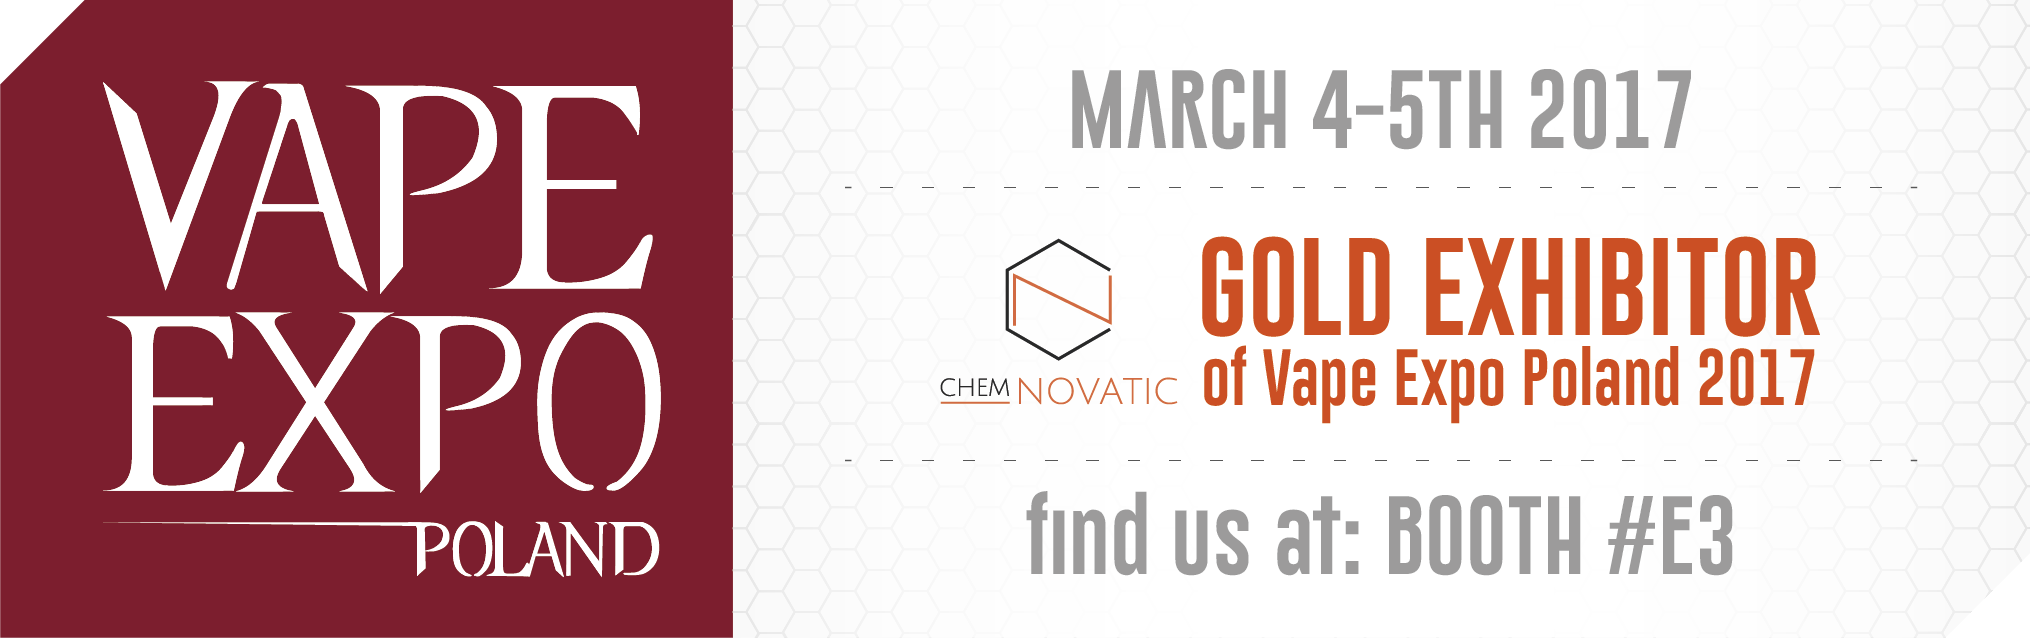 vape expo poland logo and text: march 4-5th 2017 find us at booth: #e3; chemnovatic logo and a text: gold exhibitor of vape expo poland 2017